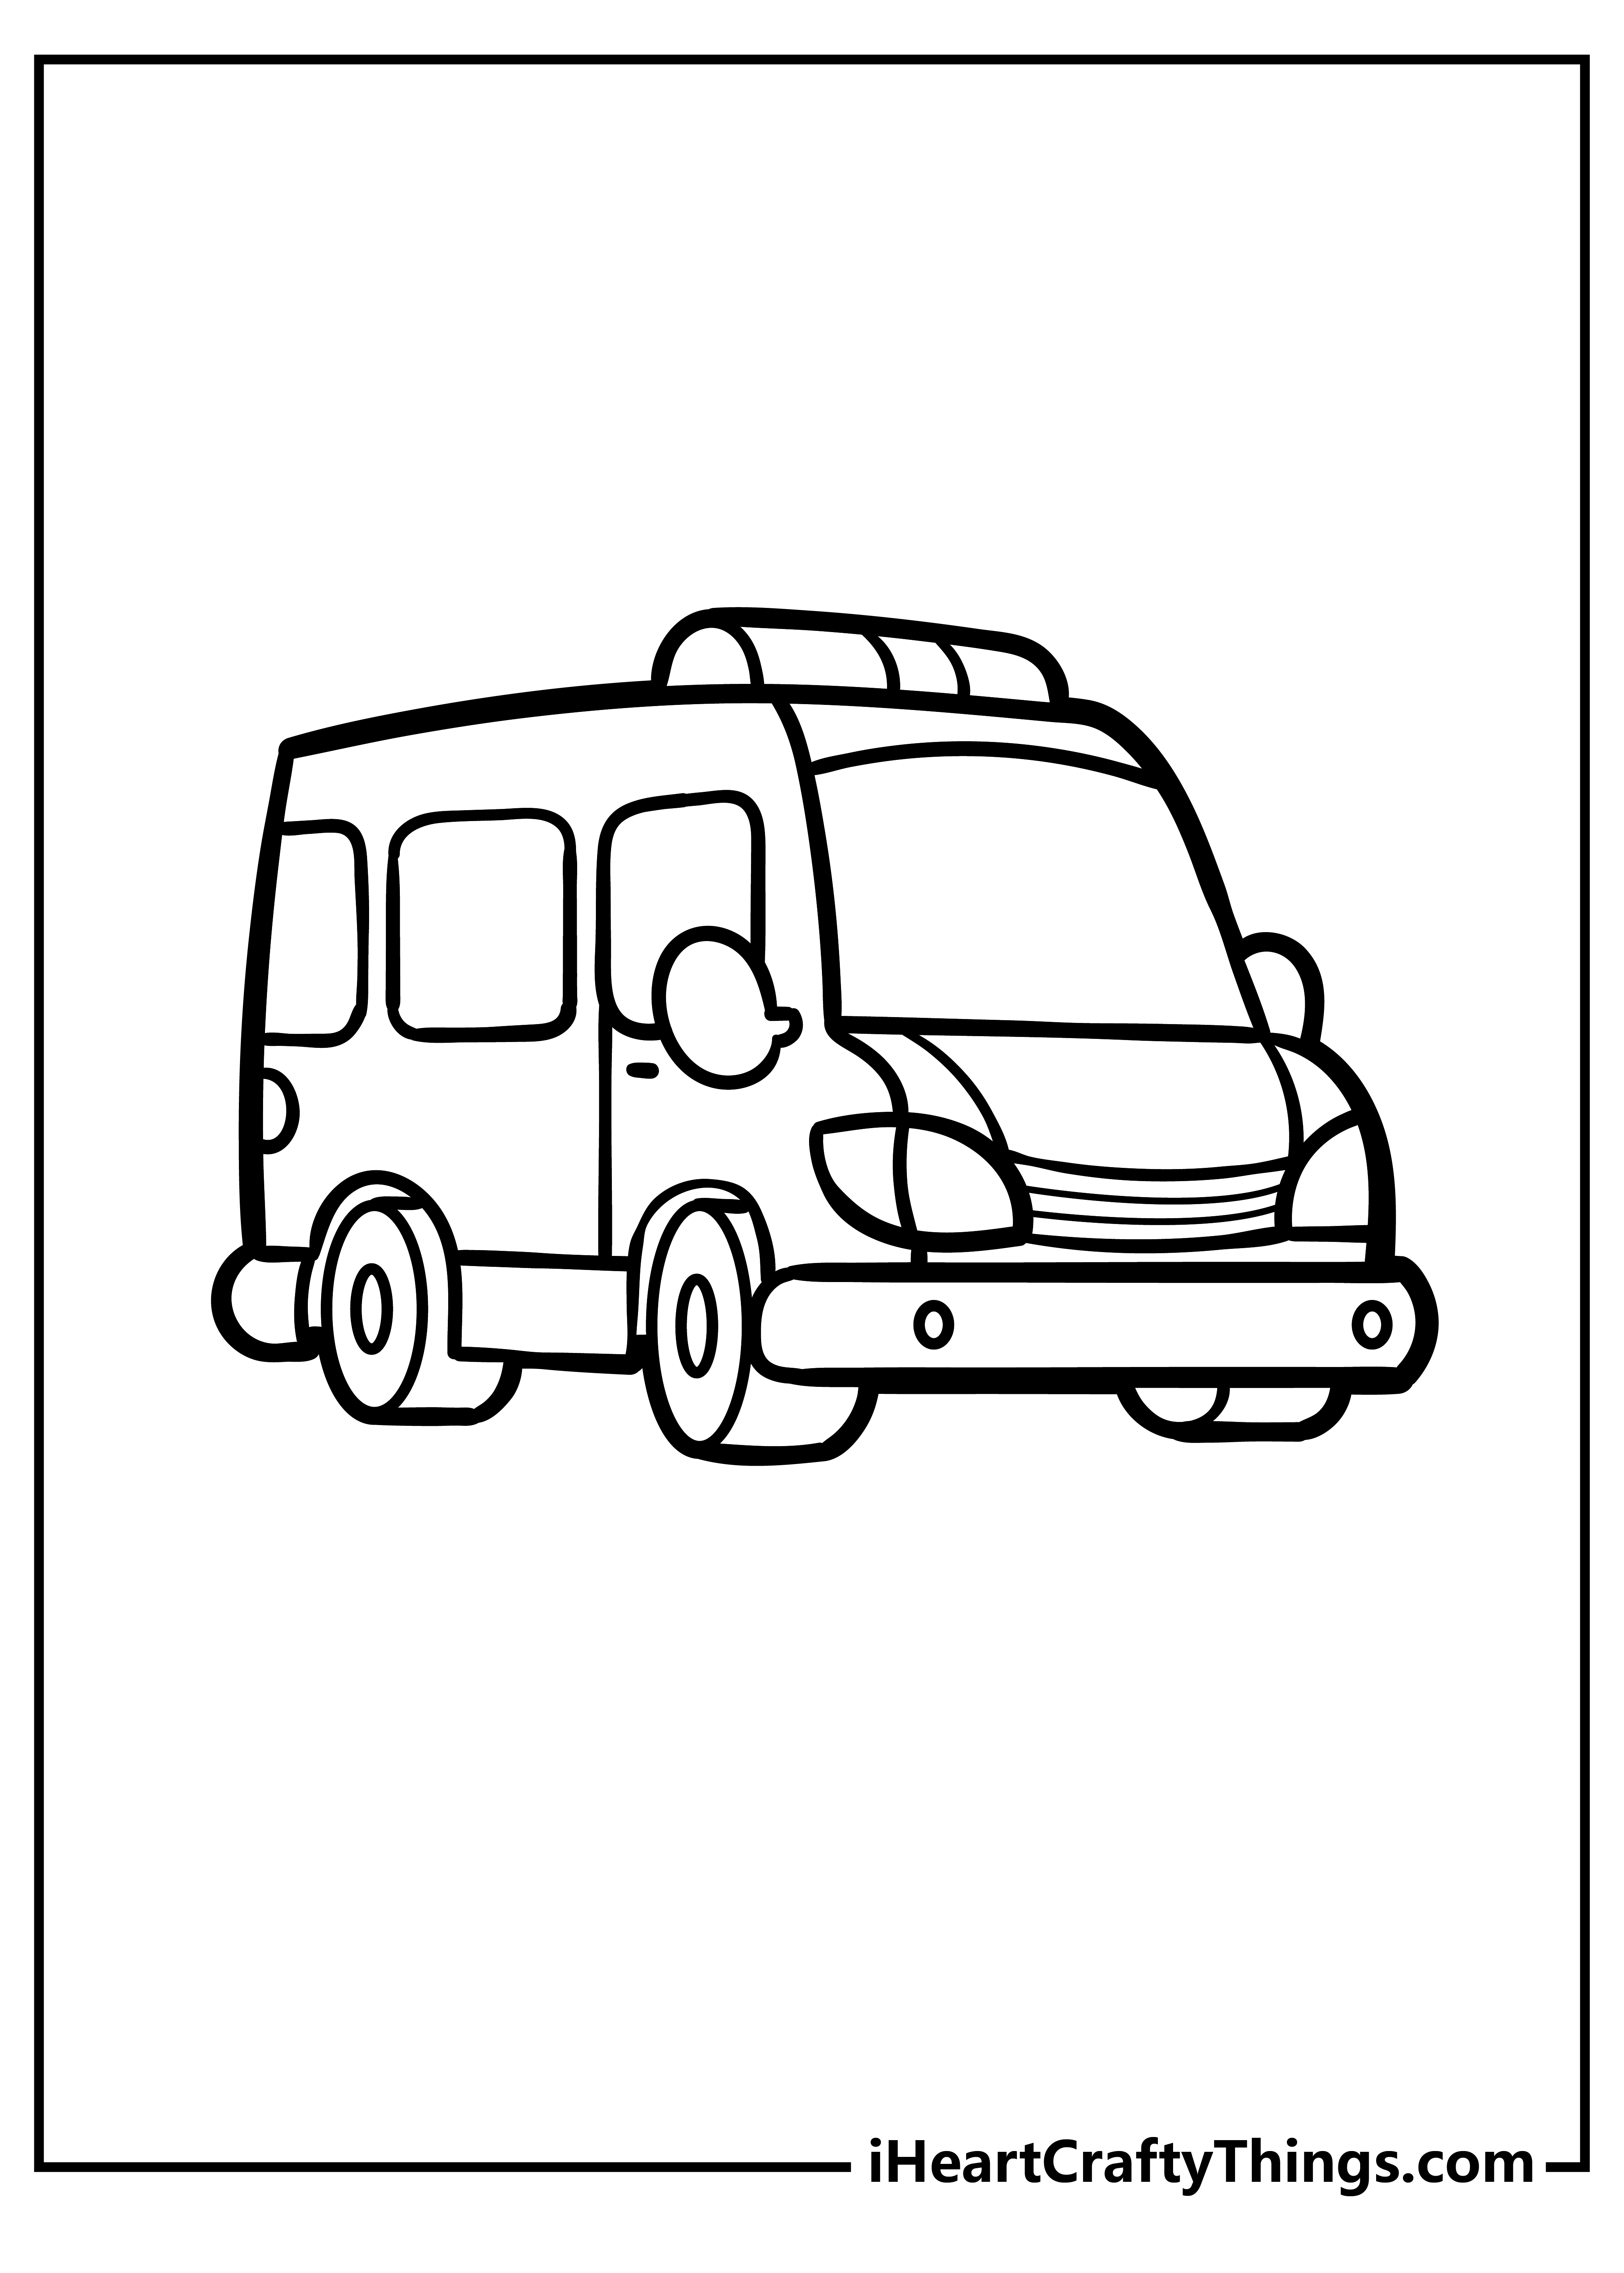 Ambulance Coloring Pages free pdf download